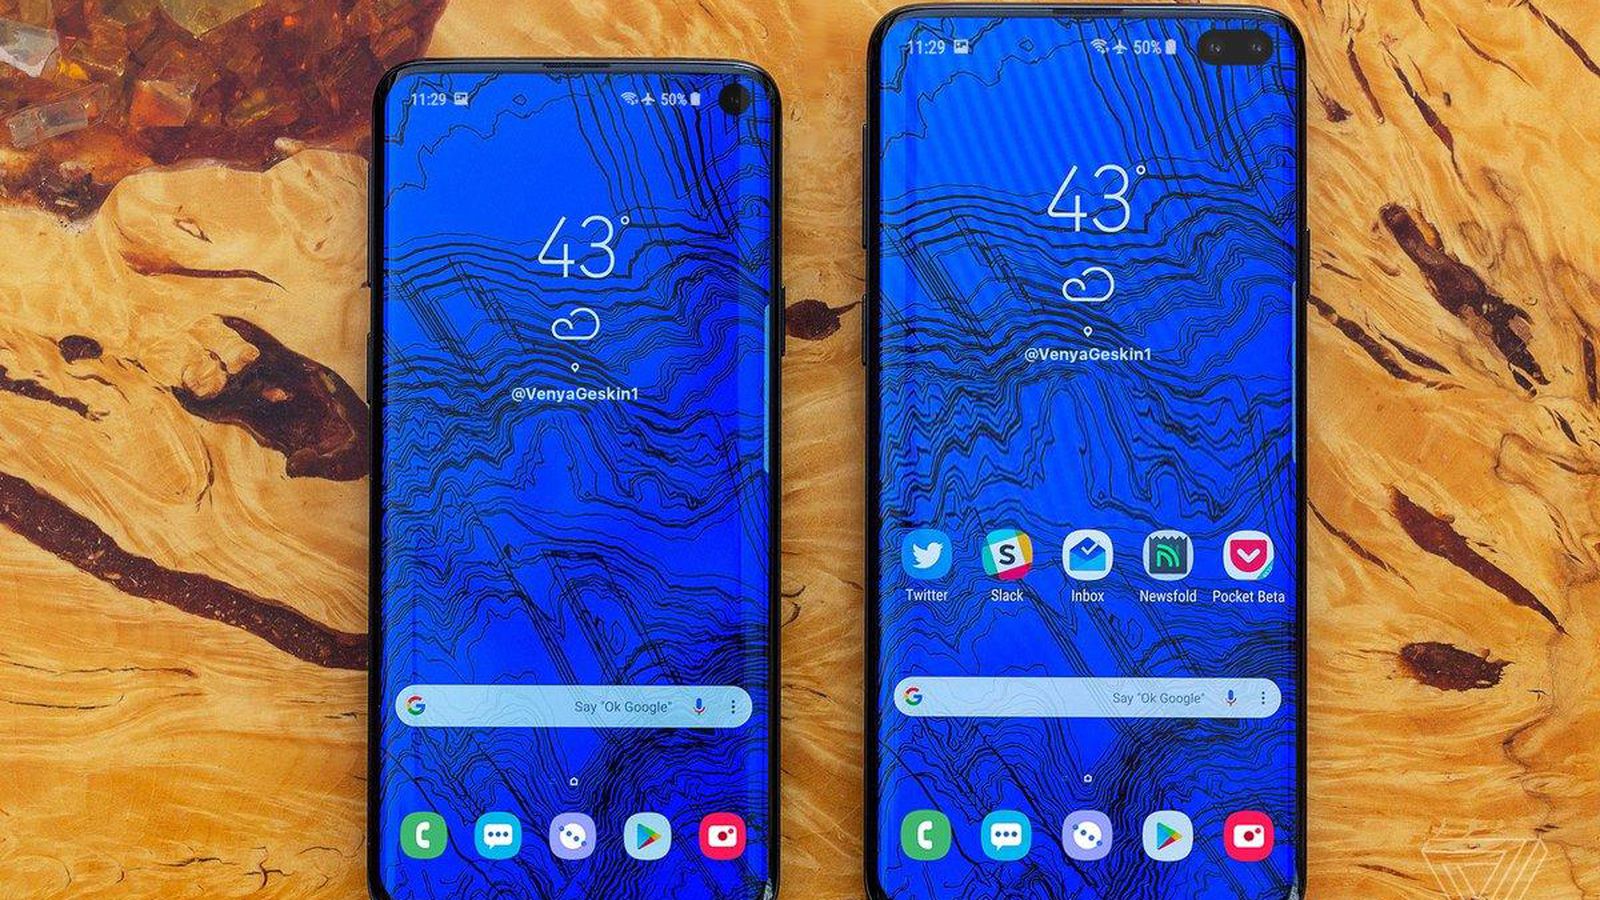 Samsung Galaxy S10 leaks roundup: Specs, camera, feature, price